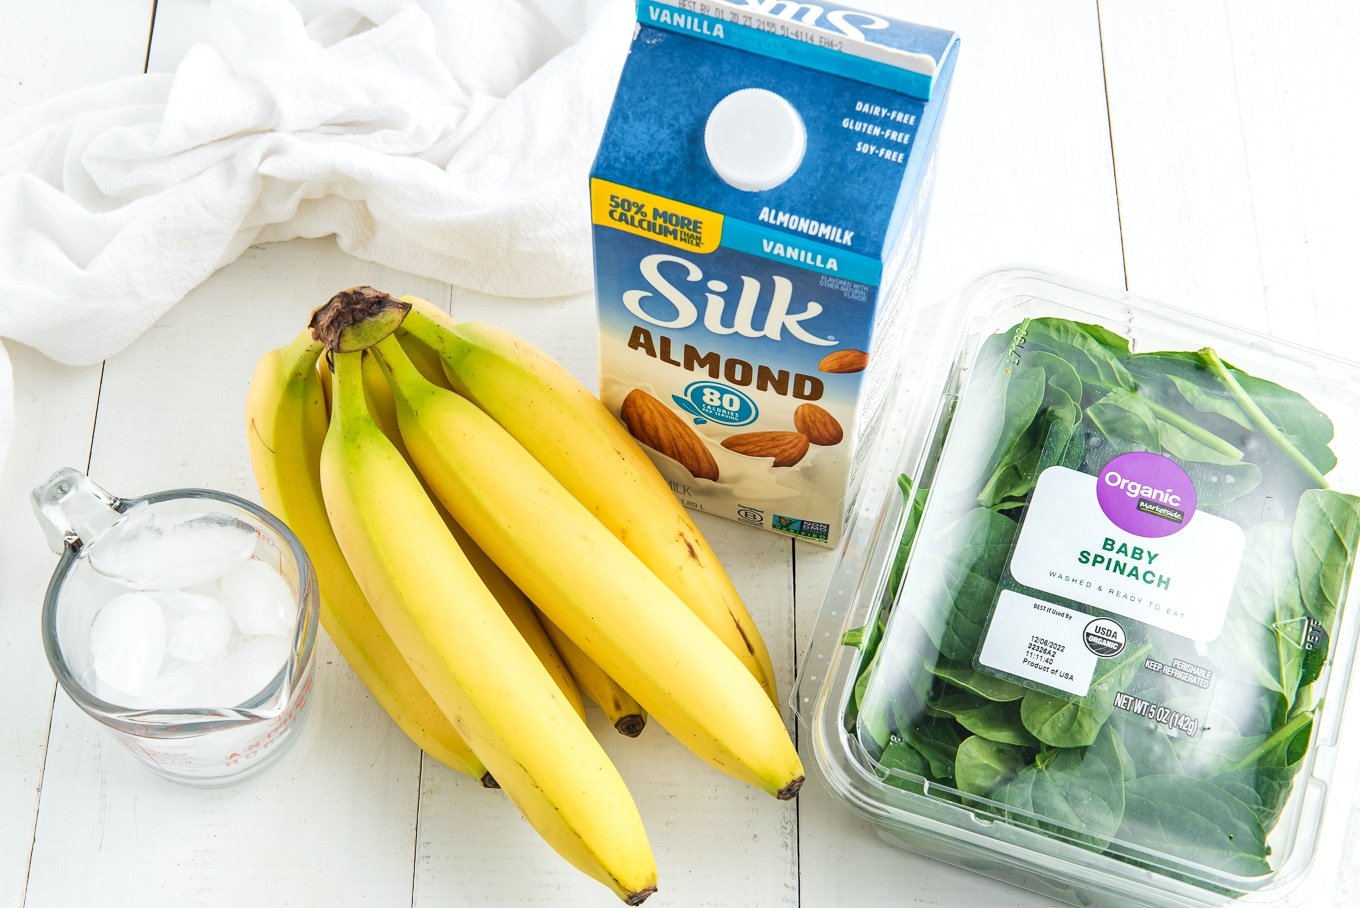 Ingredients to make a spinach banana smoothie on the table.